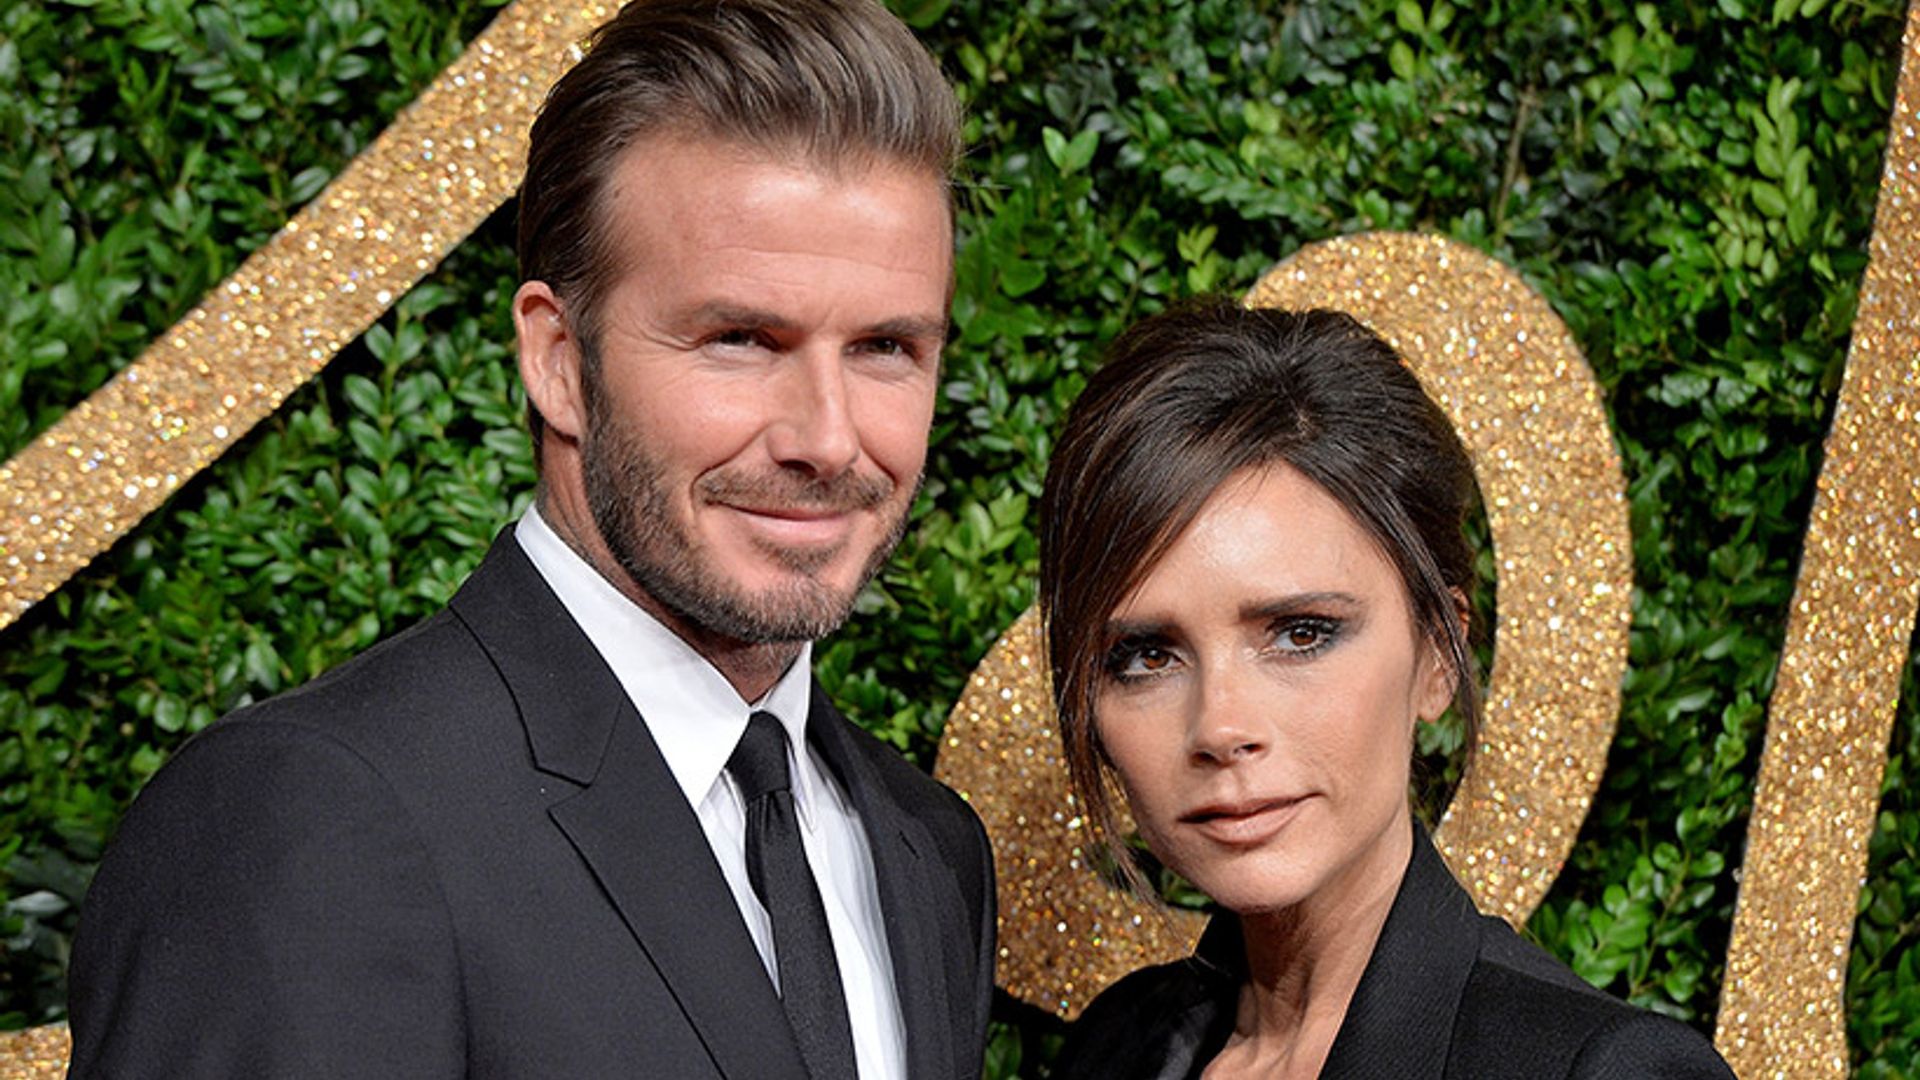 David Beckham shares Valentine's message for Victoria and their 